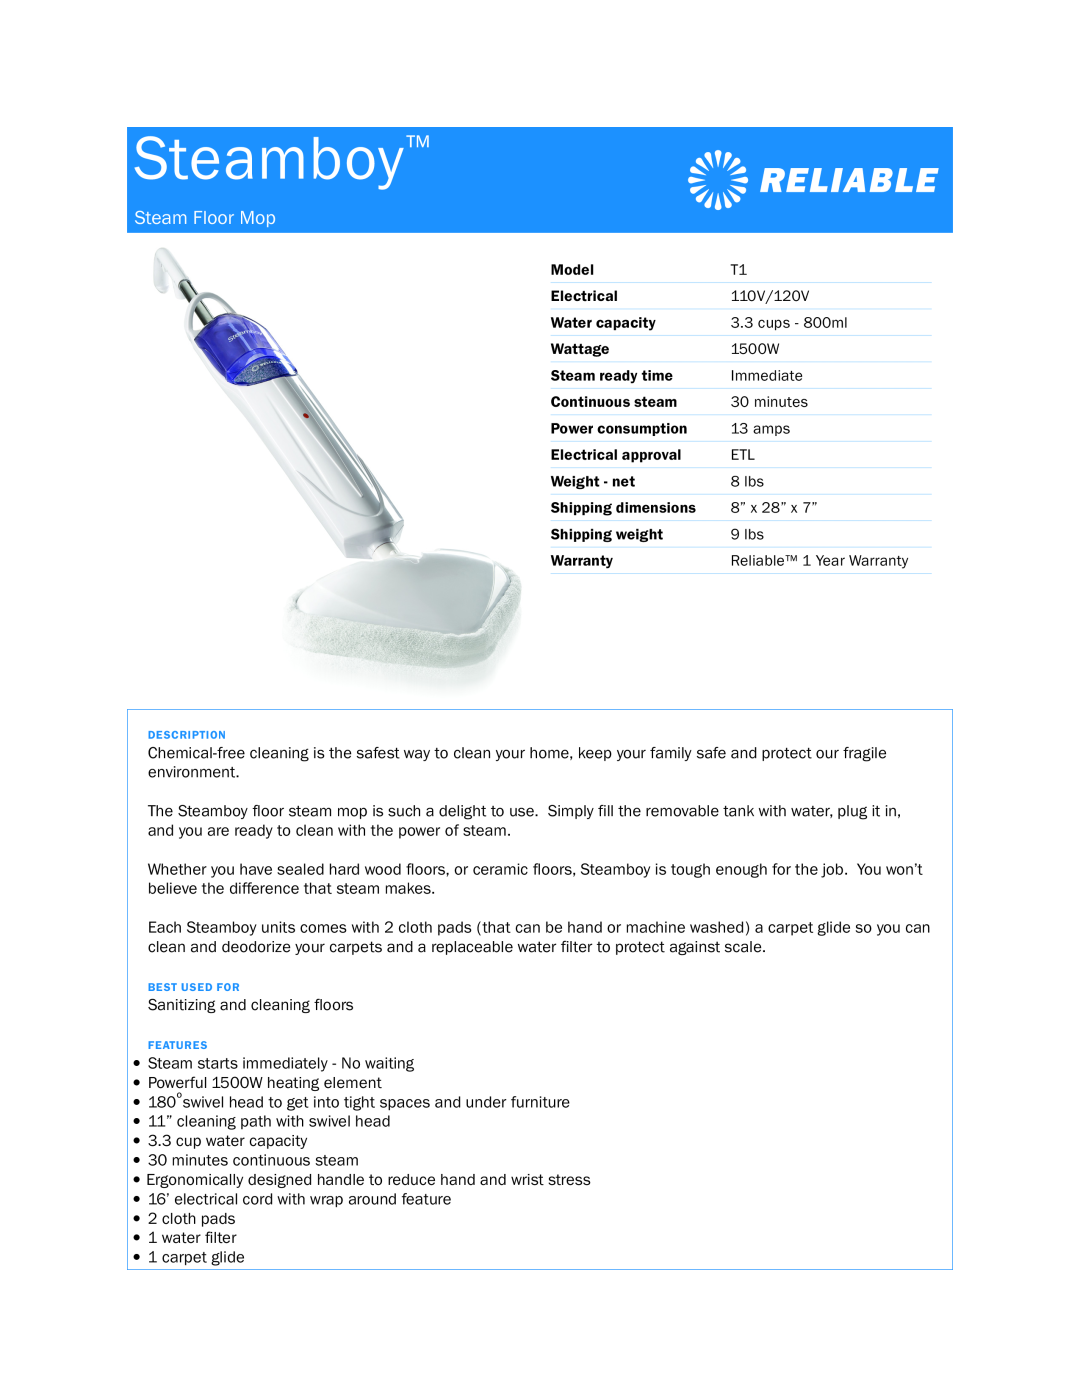 Reliable T1 dimensions Steamboy, Steam Floor Mop 